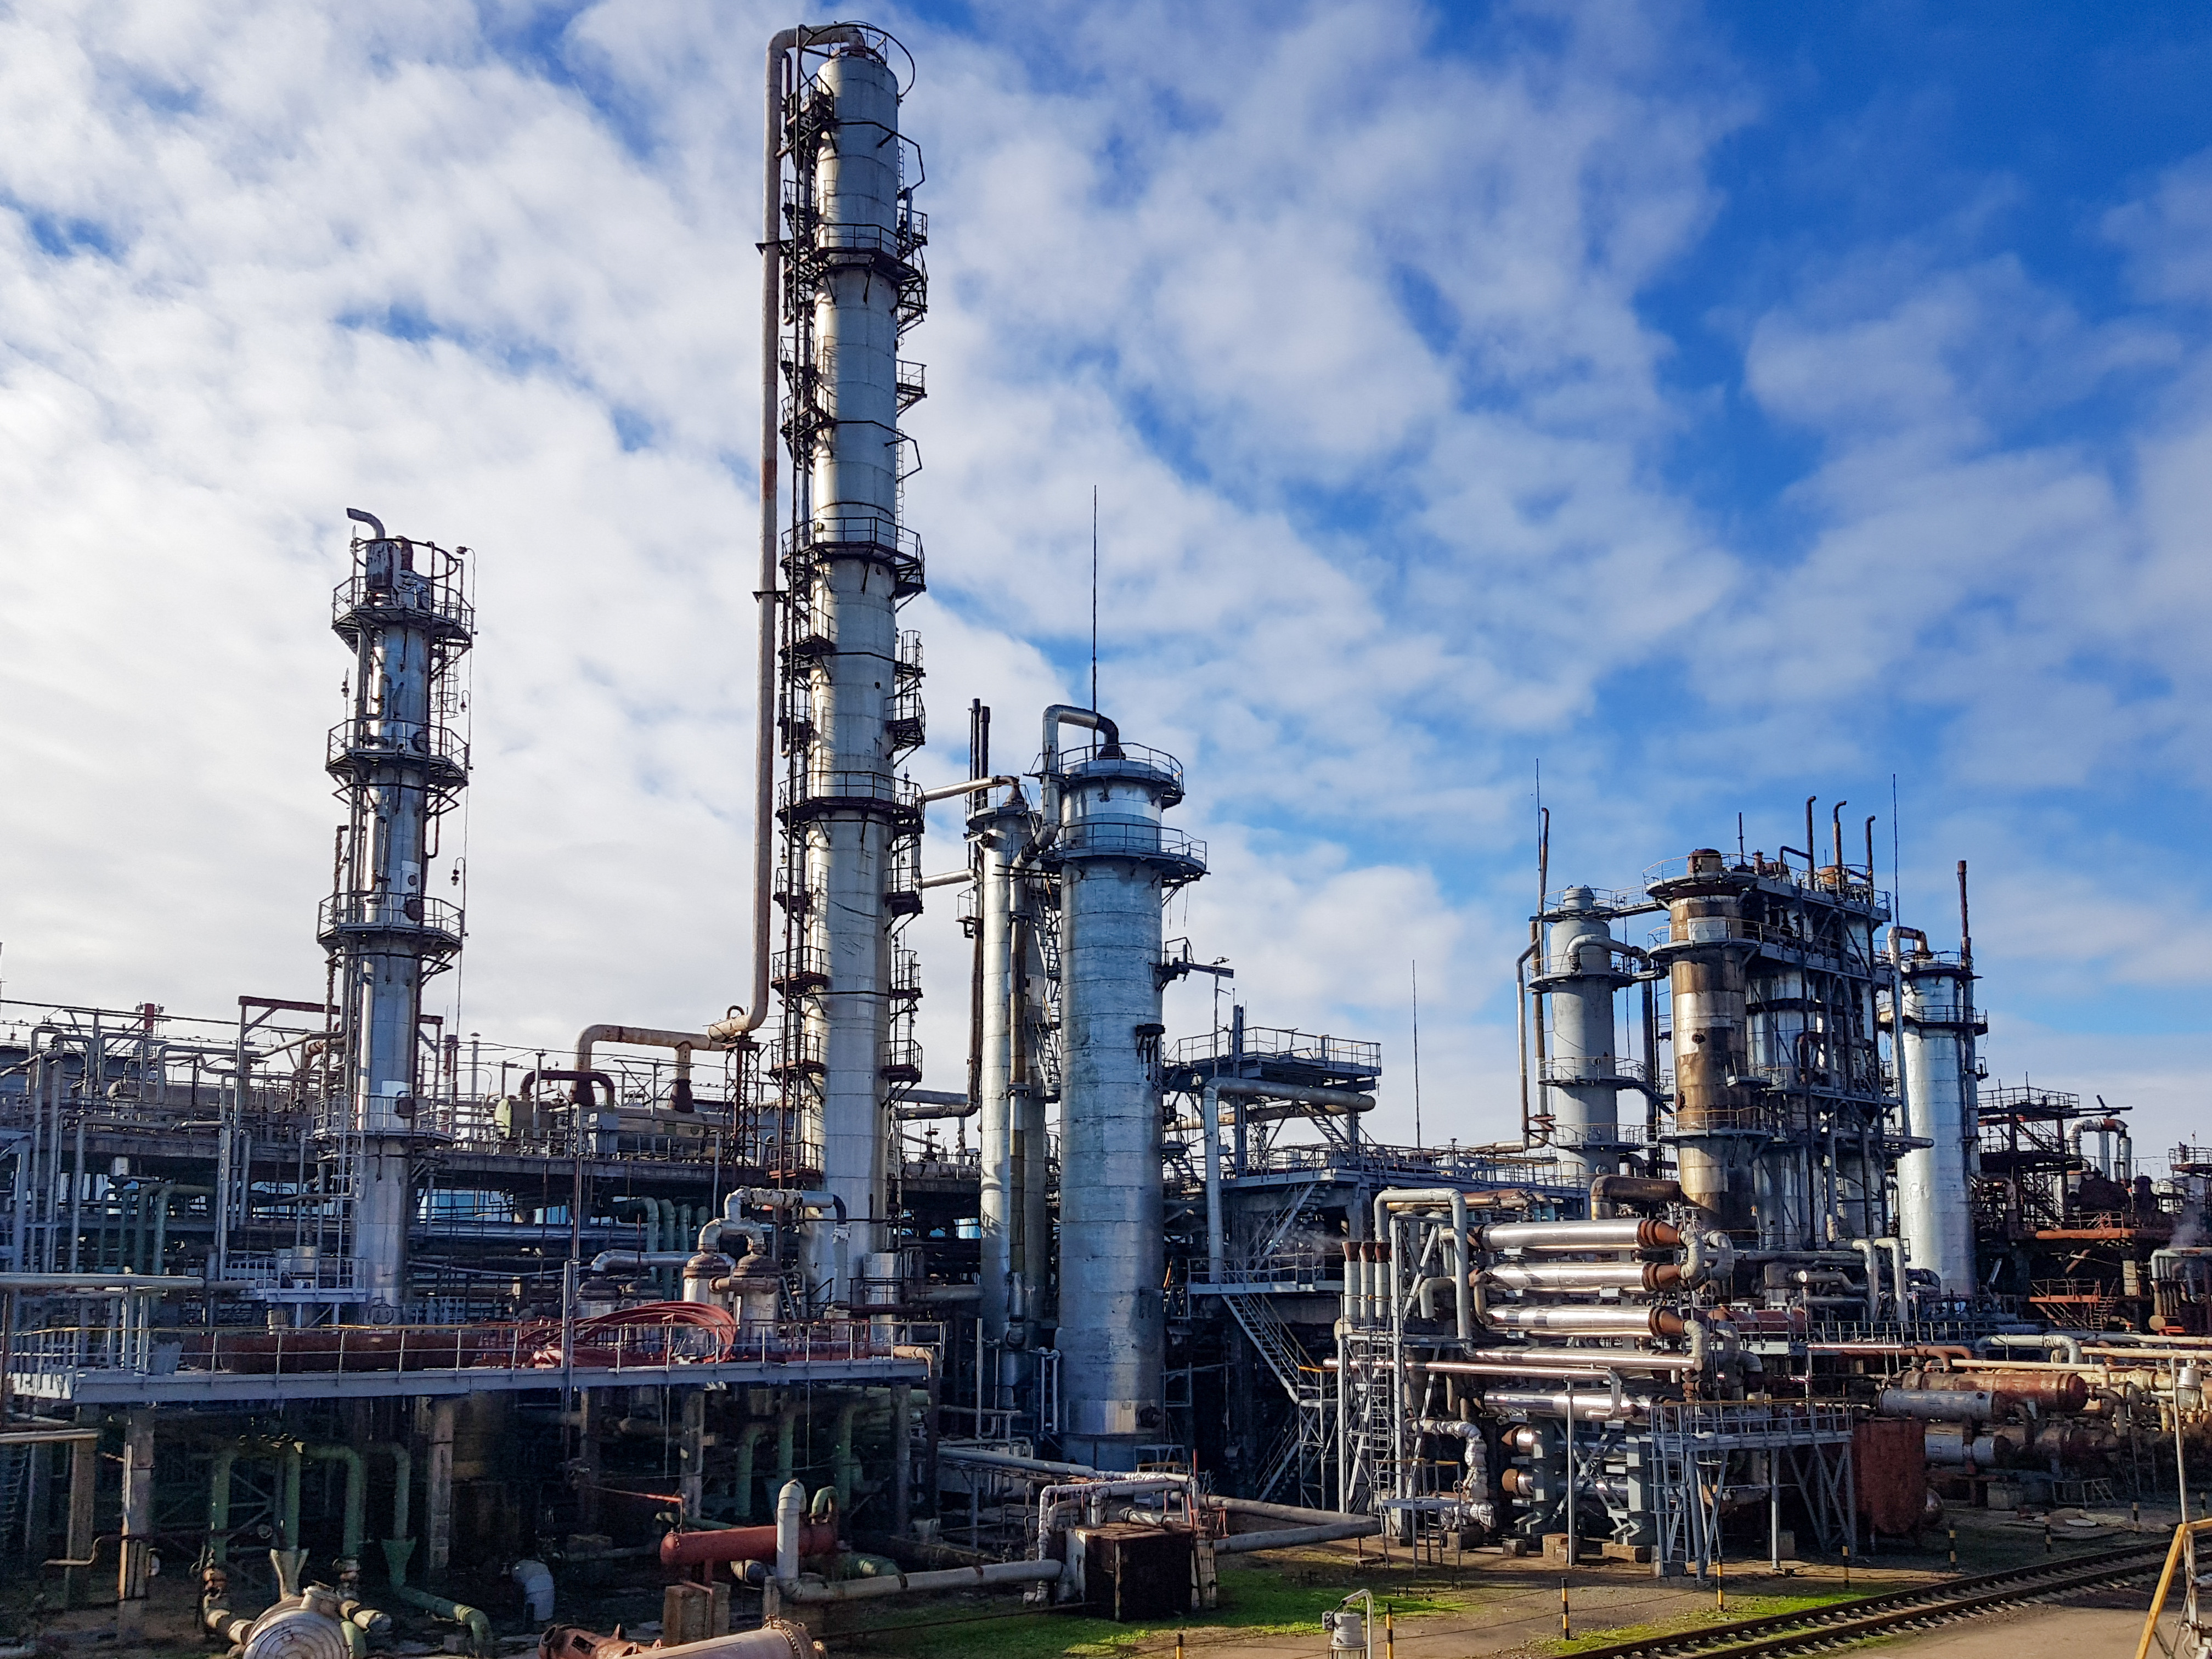 Efficiently converting methane into higher-value chemicals such as methanol for sustainable energy has been a lengthy quest in the field of chemistry. Photo: Shutterstock